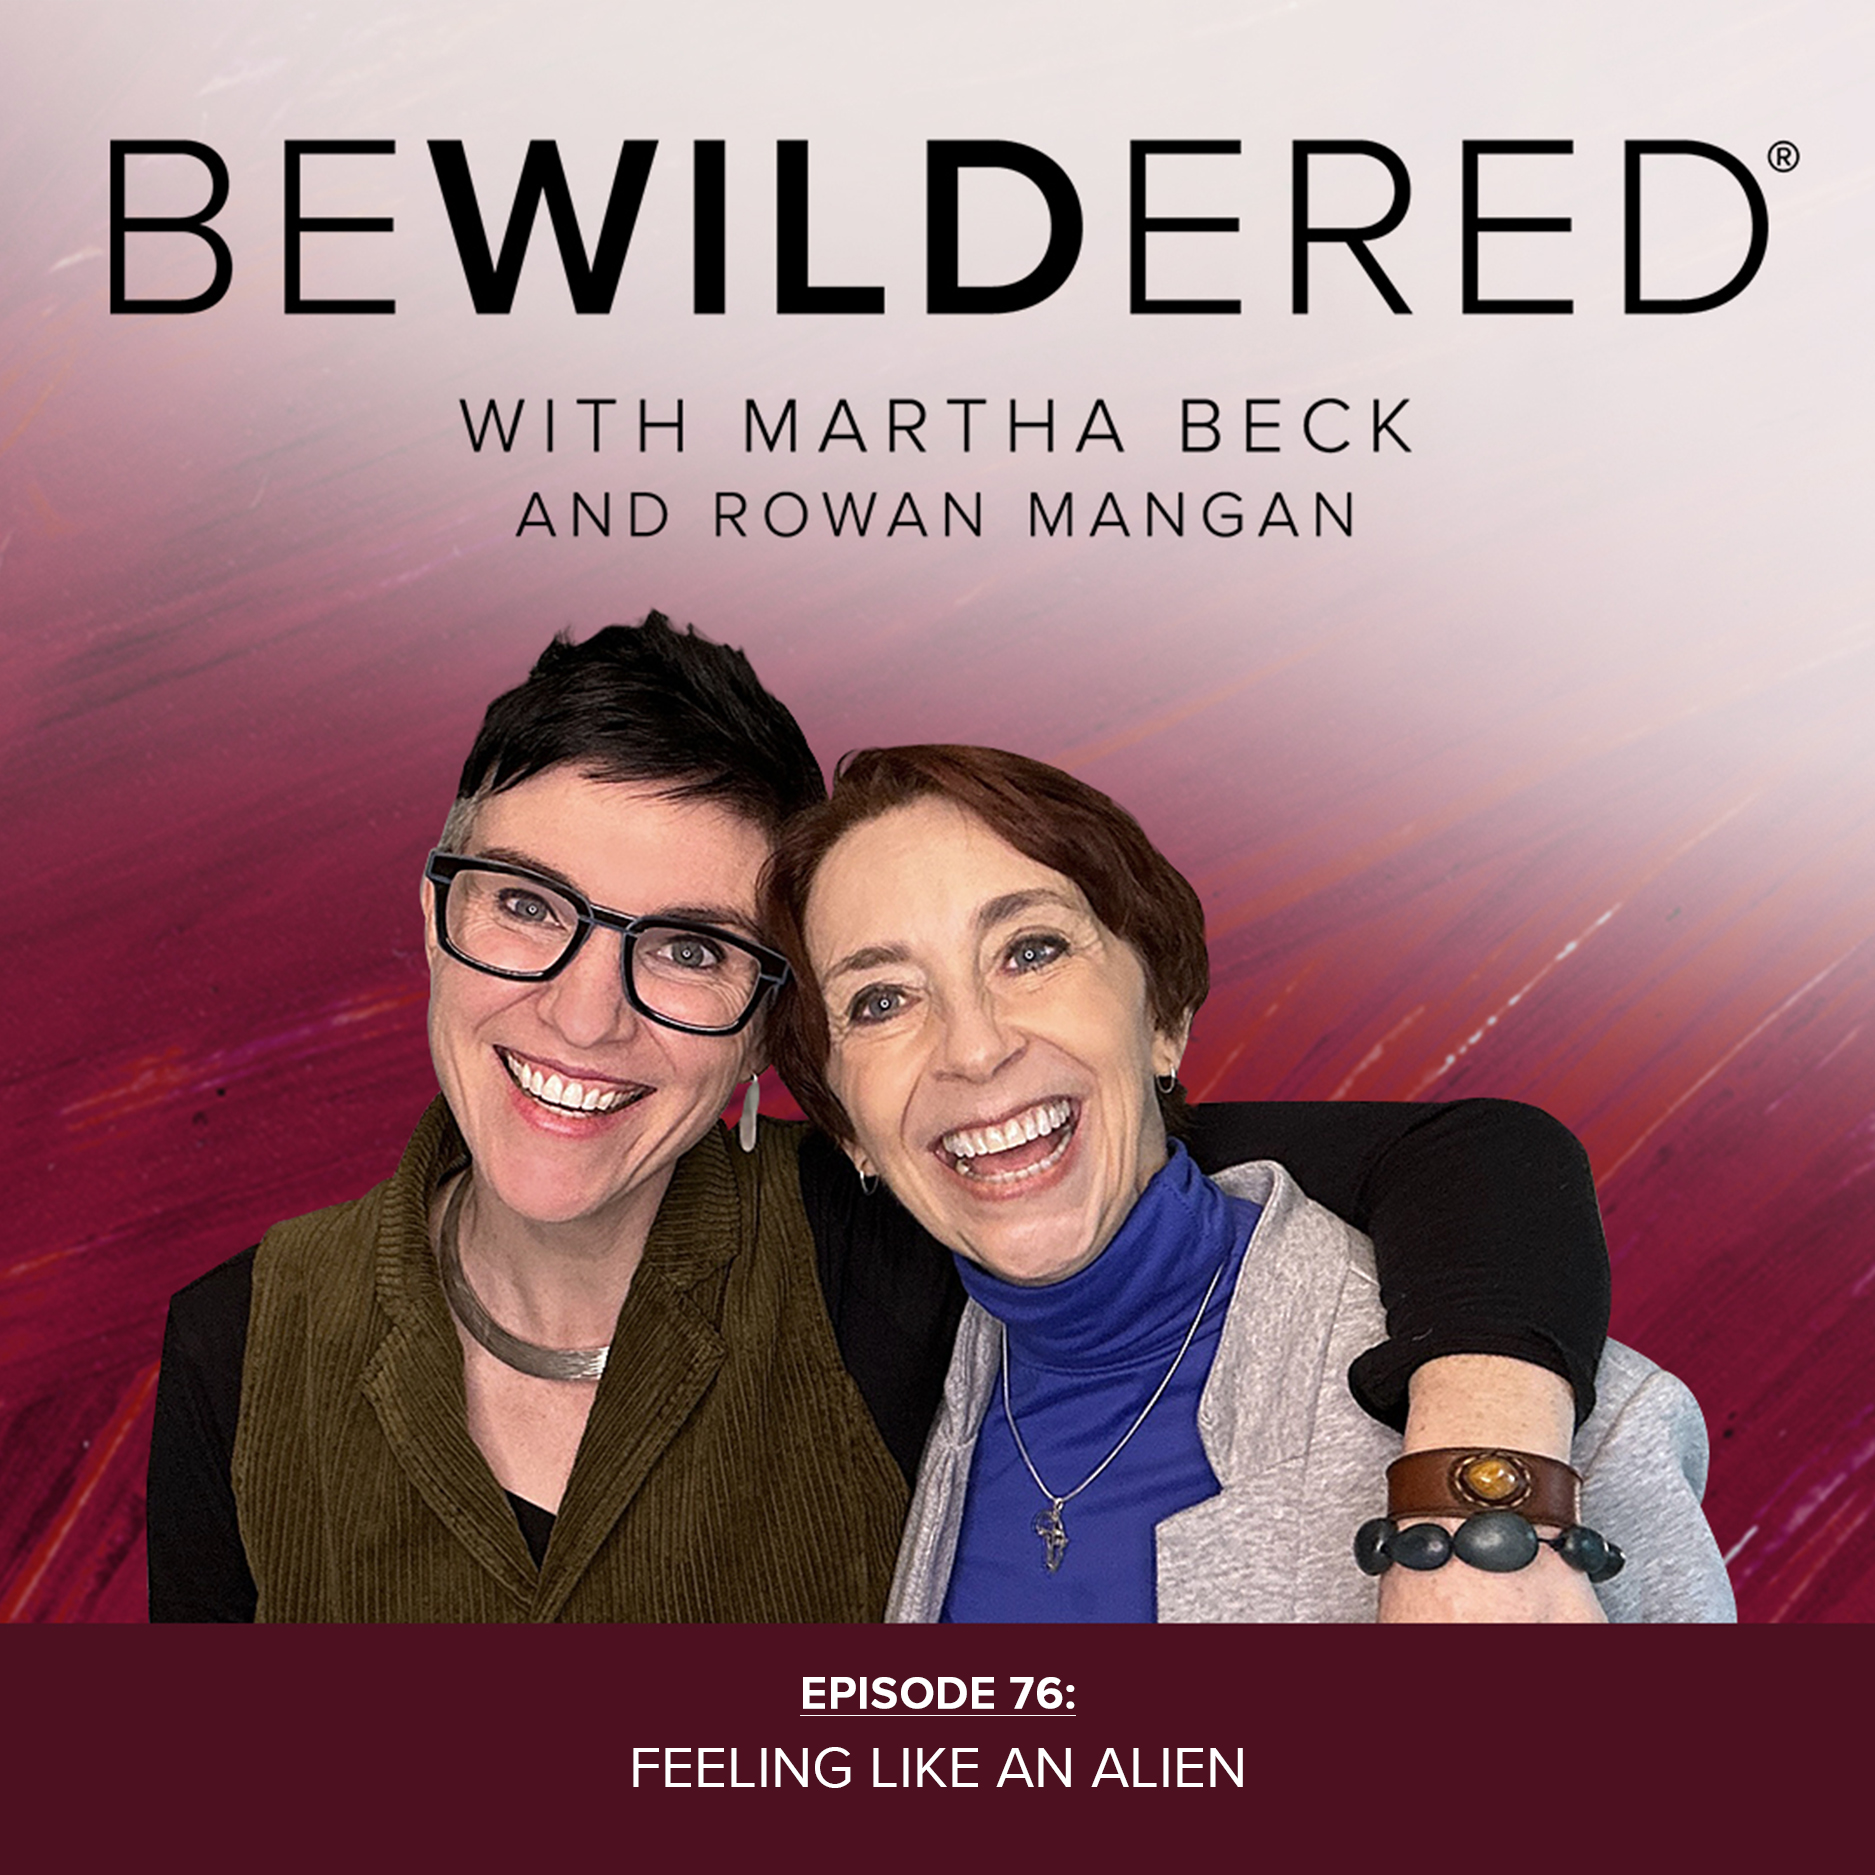 Image for Episode #76 Feeling Like an Alien for the Bewildered Podcast with Martha Beck and Rowan Mangan